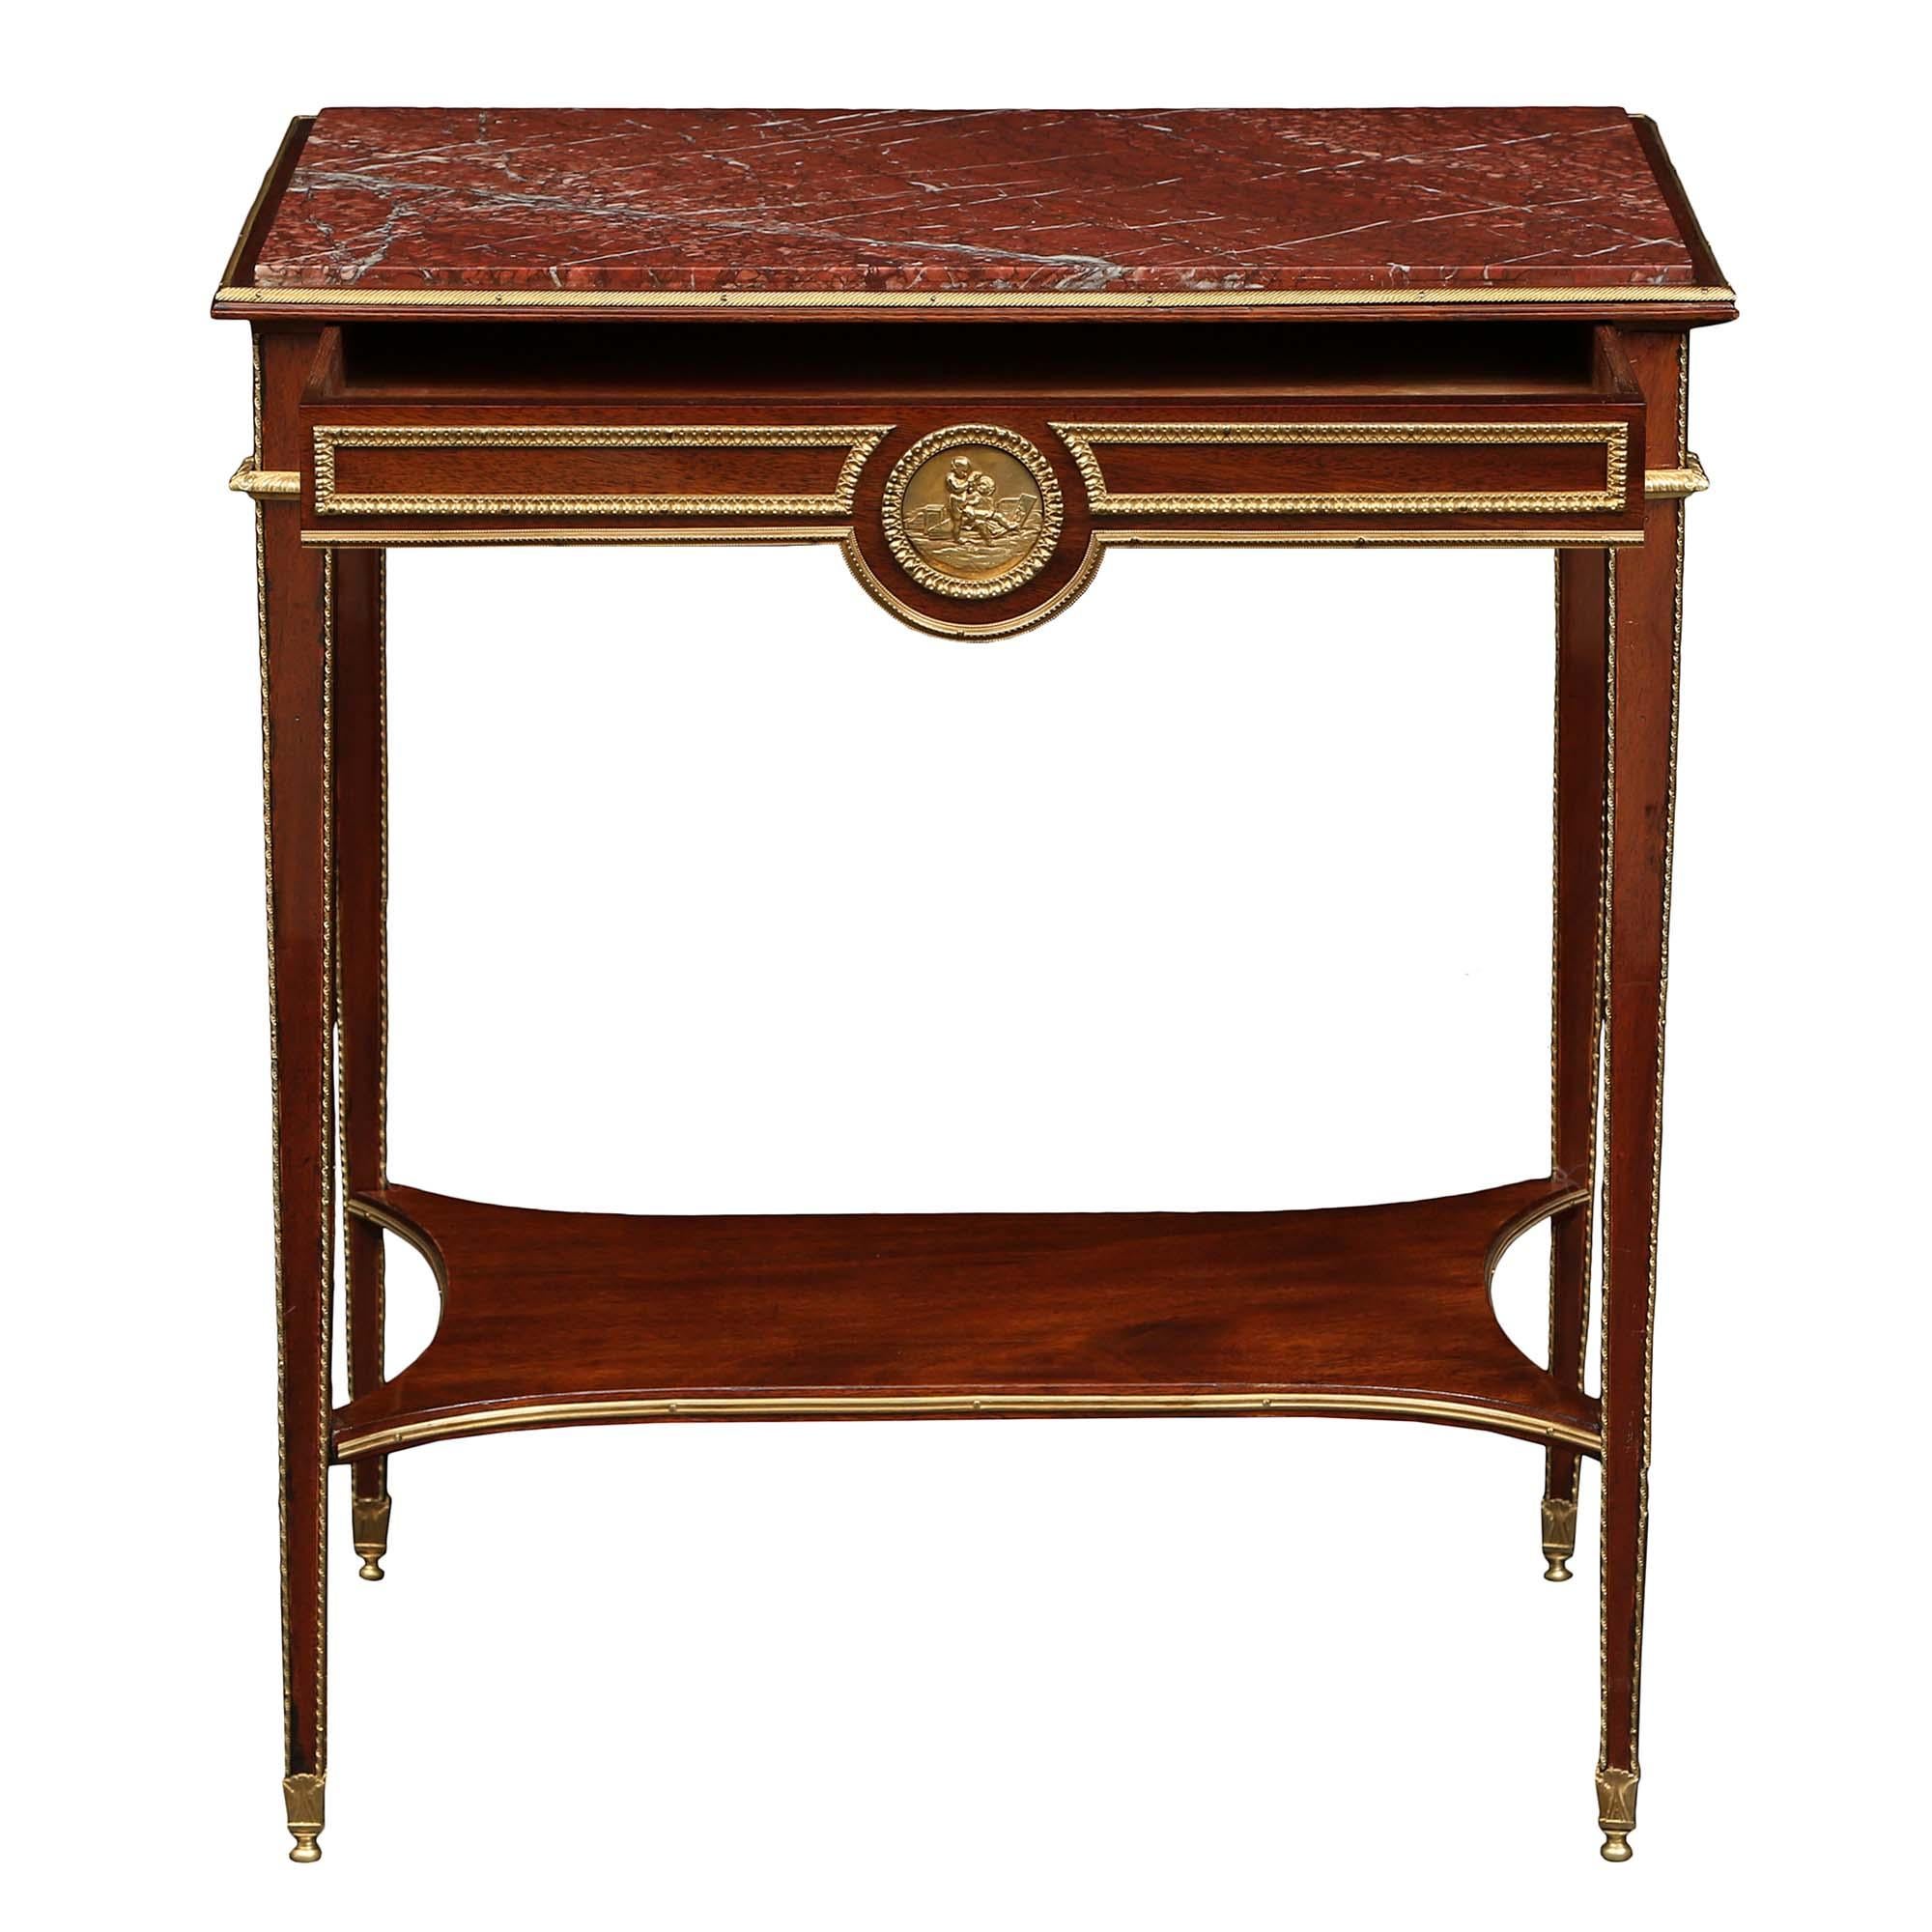 Ormolu French Mid-19th Century Louis XVI Style Mahogany Rectangular Side Table For Sale